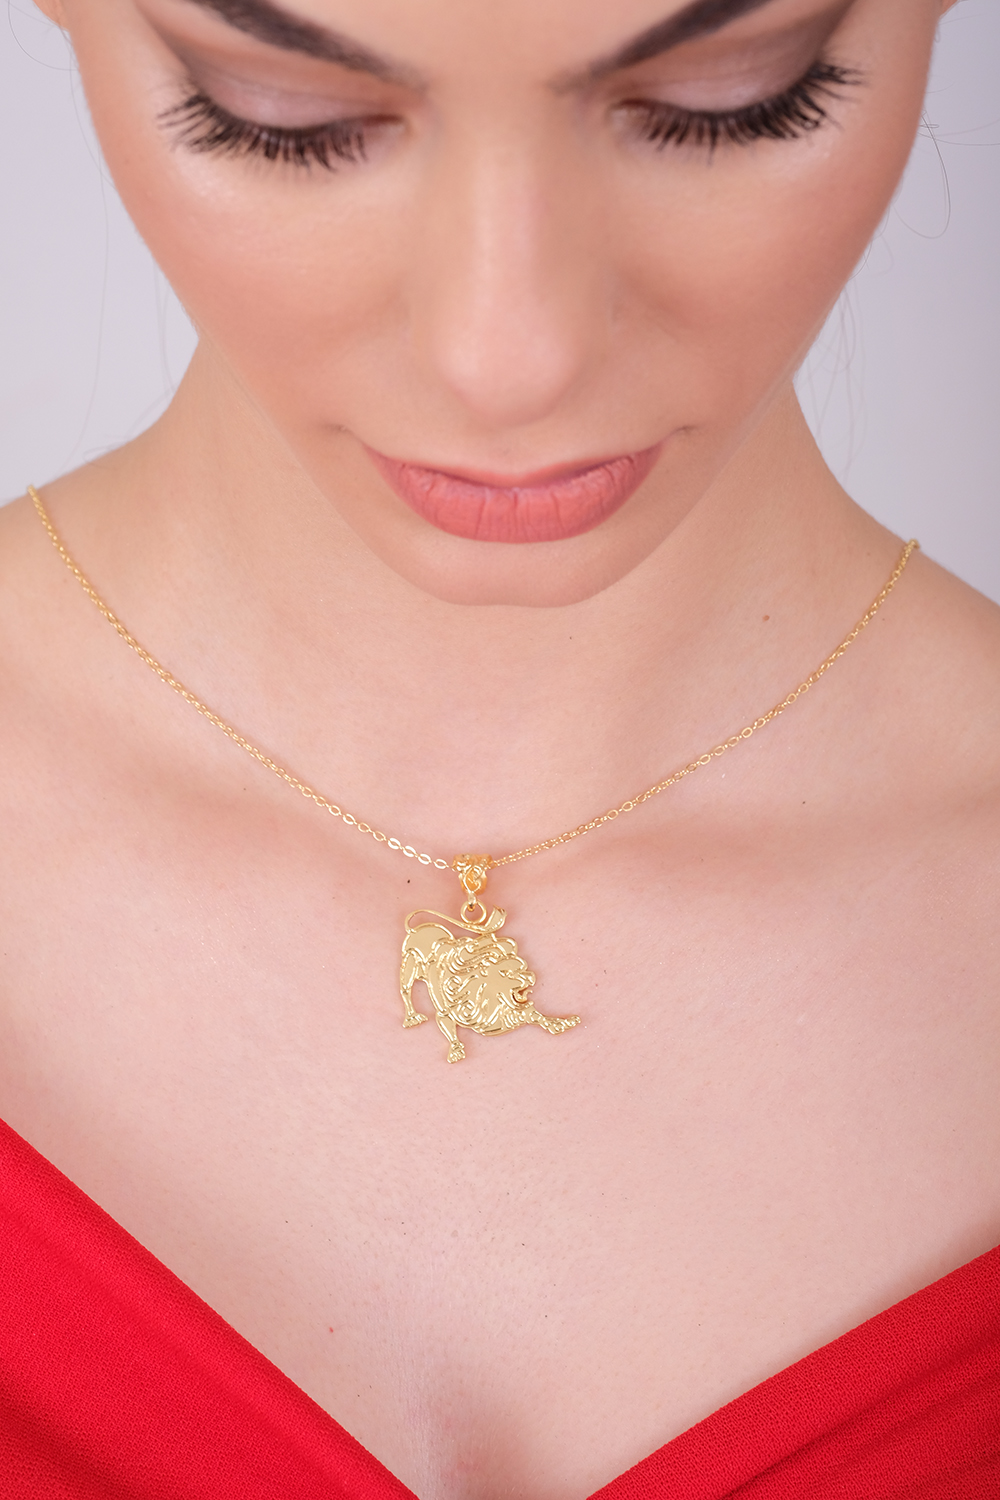 LEO Necklace-Gold Plated